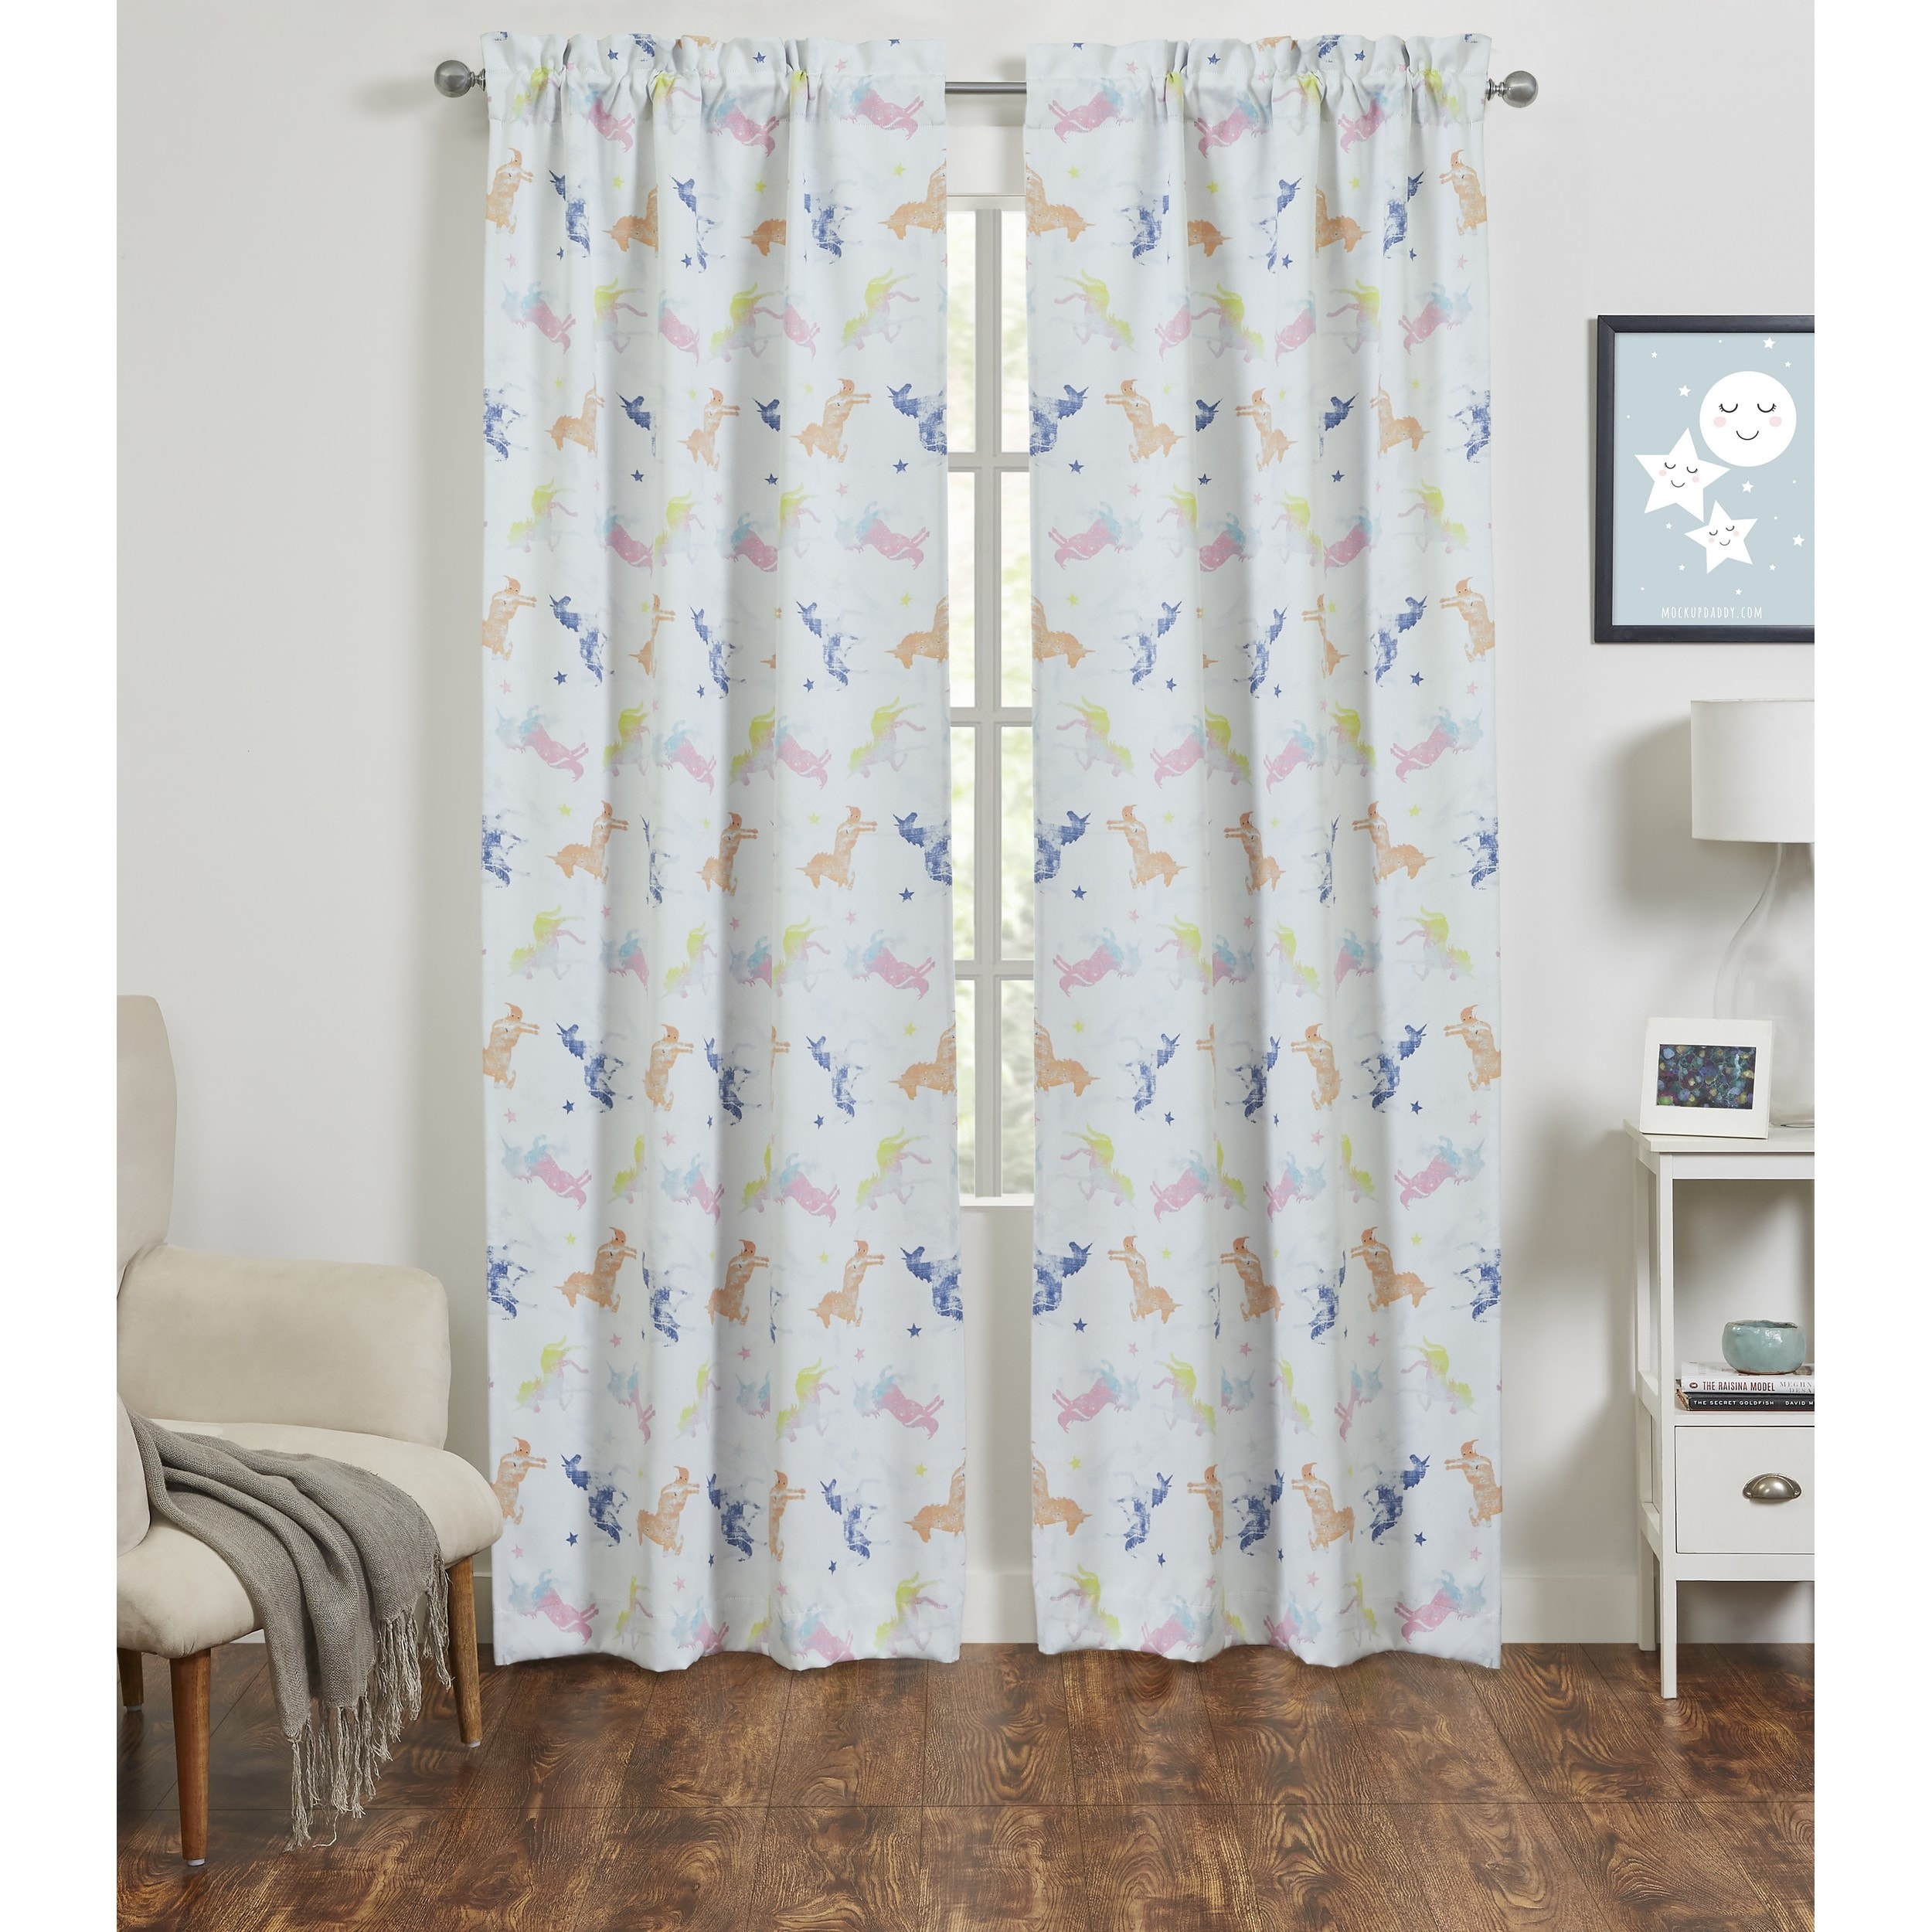 VCNY Curtains - Bed Bath & Beyond